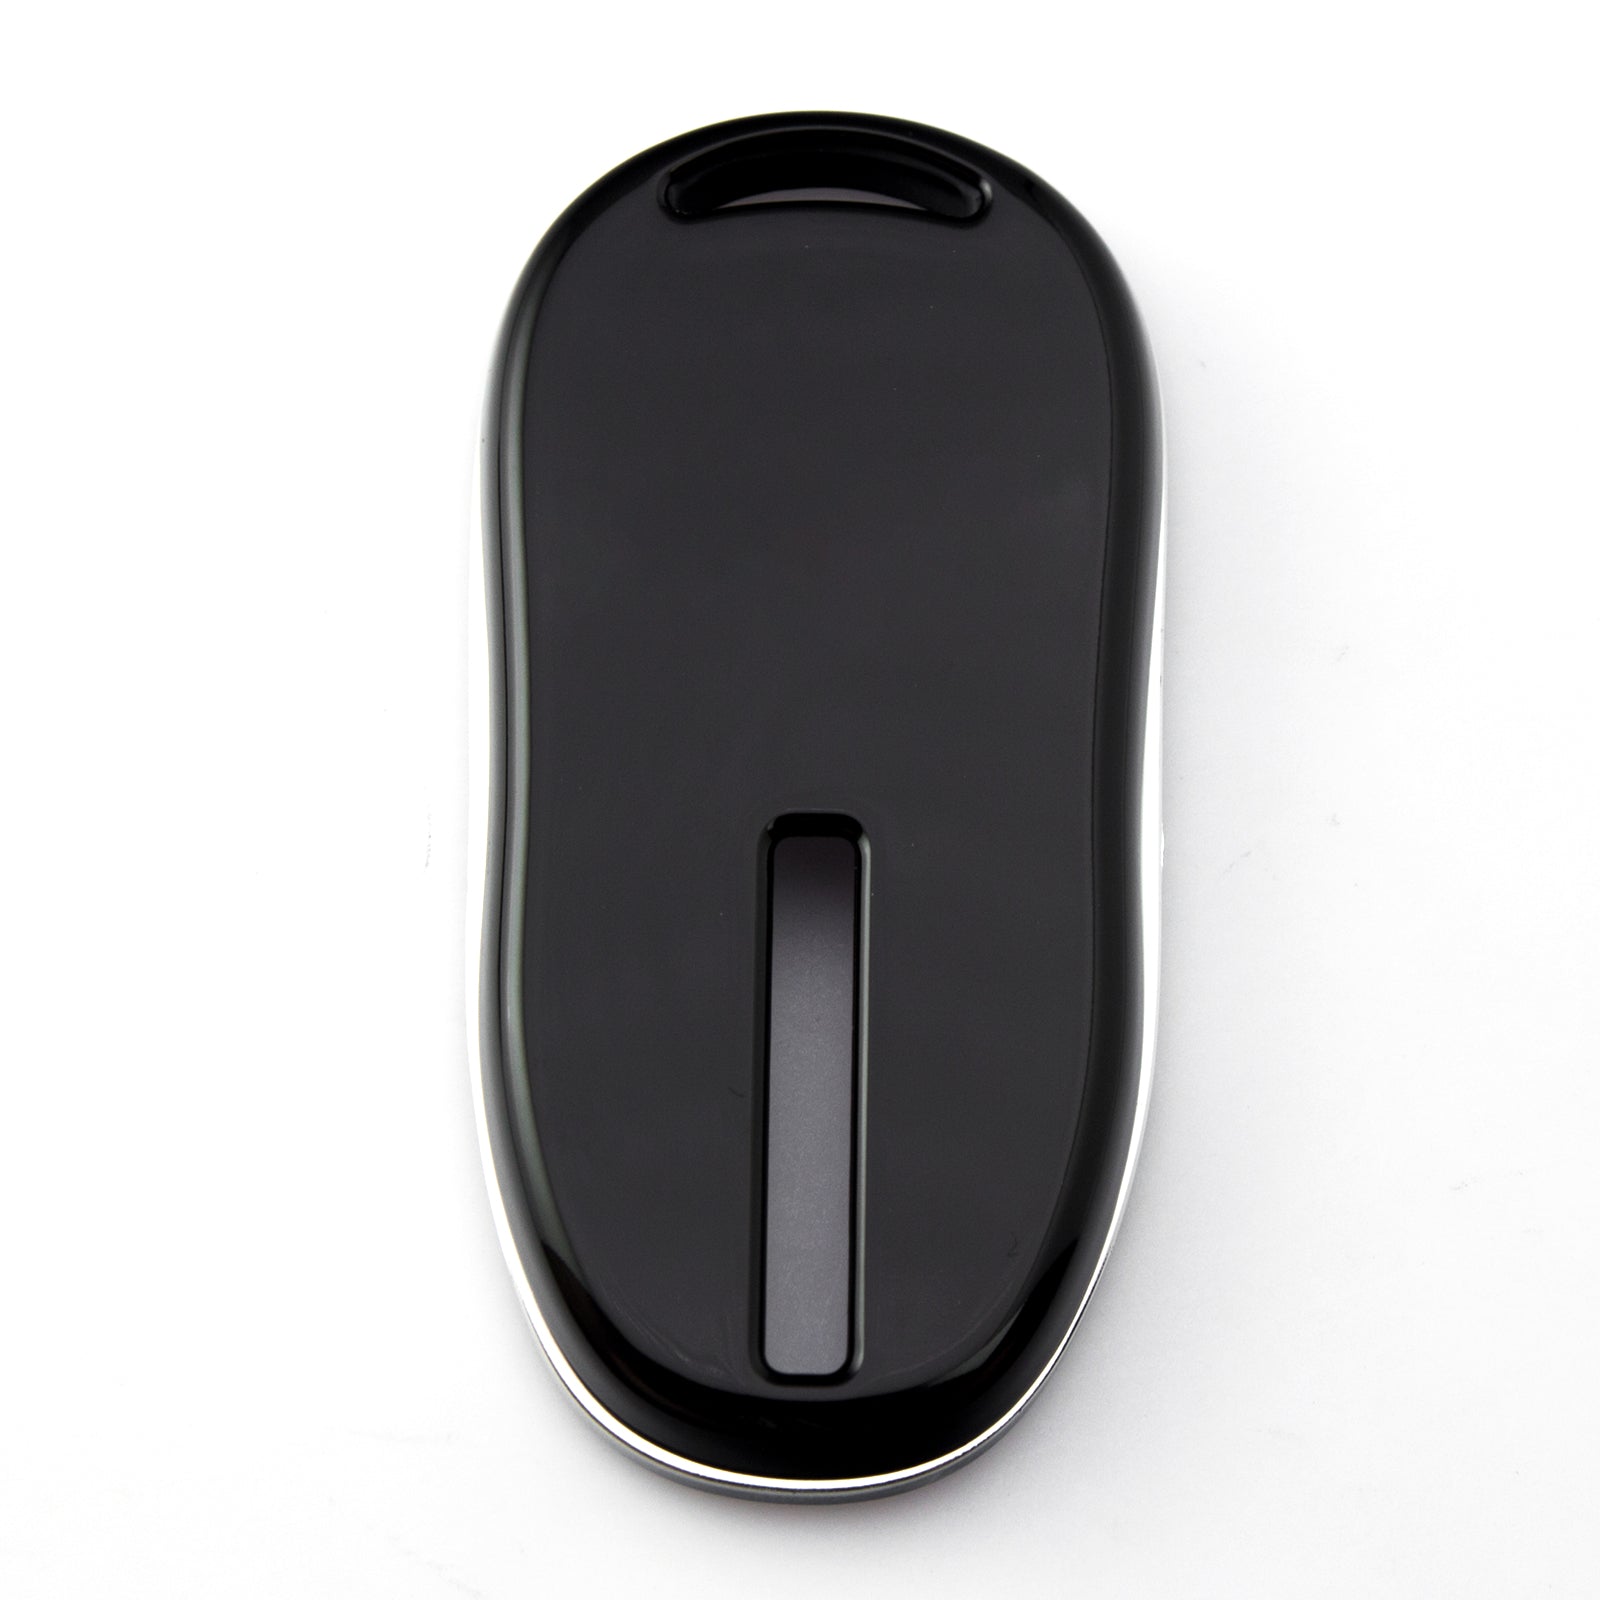 Color Match Your Tesla Key Fob with this Replacement Shell Cover